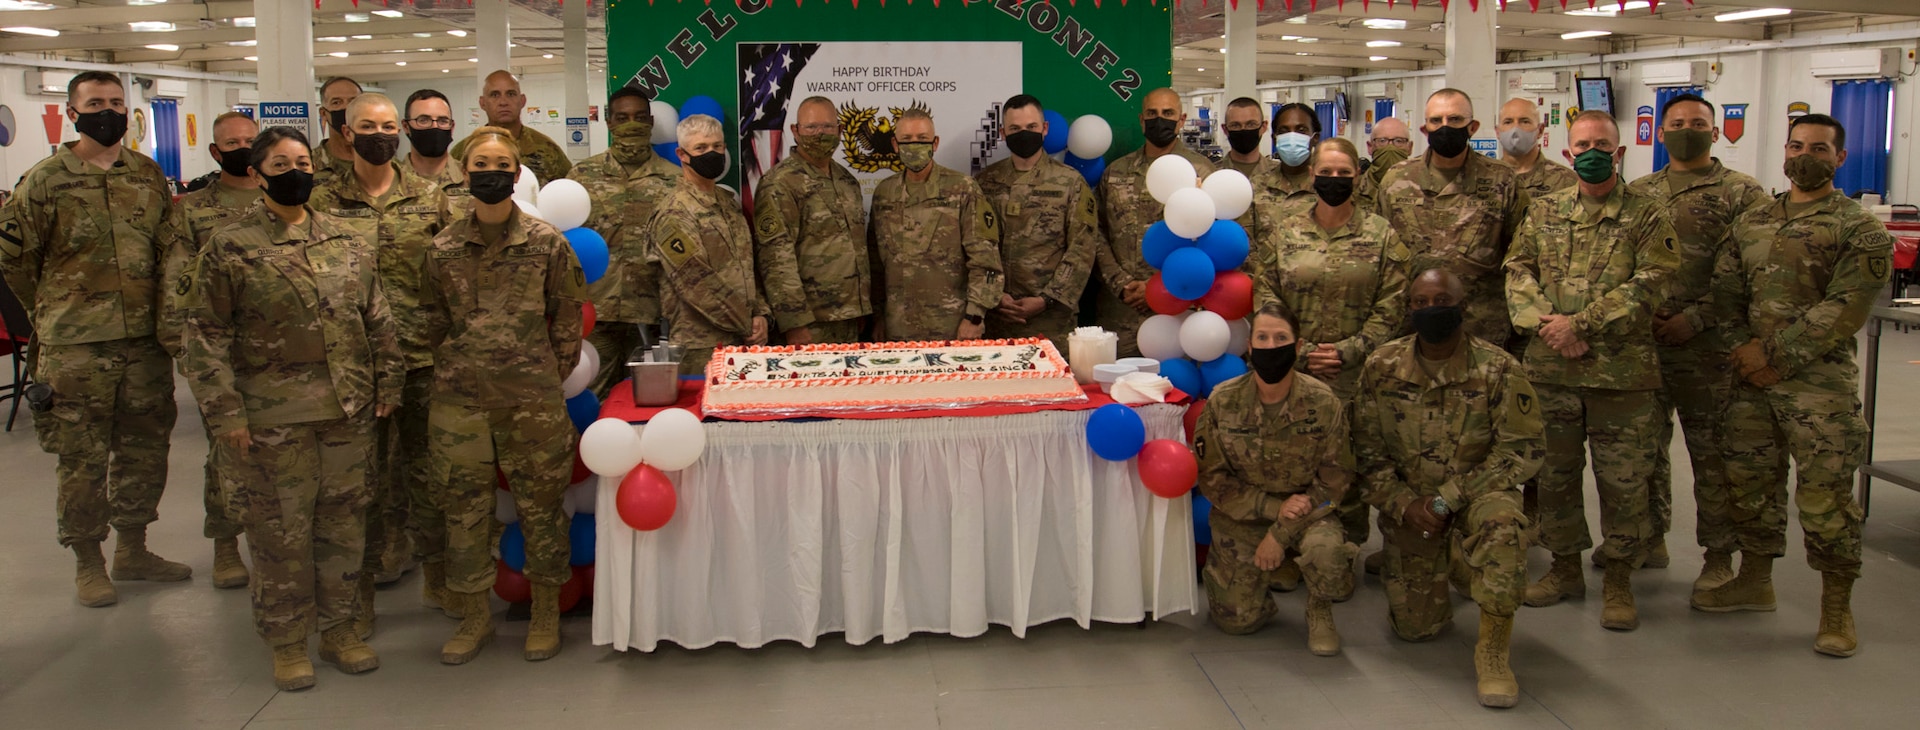 Task Force Spartan warrant officers celebrate 103rd birthday